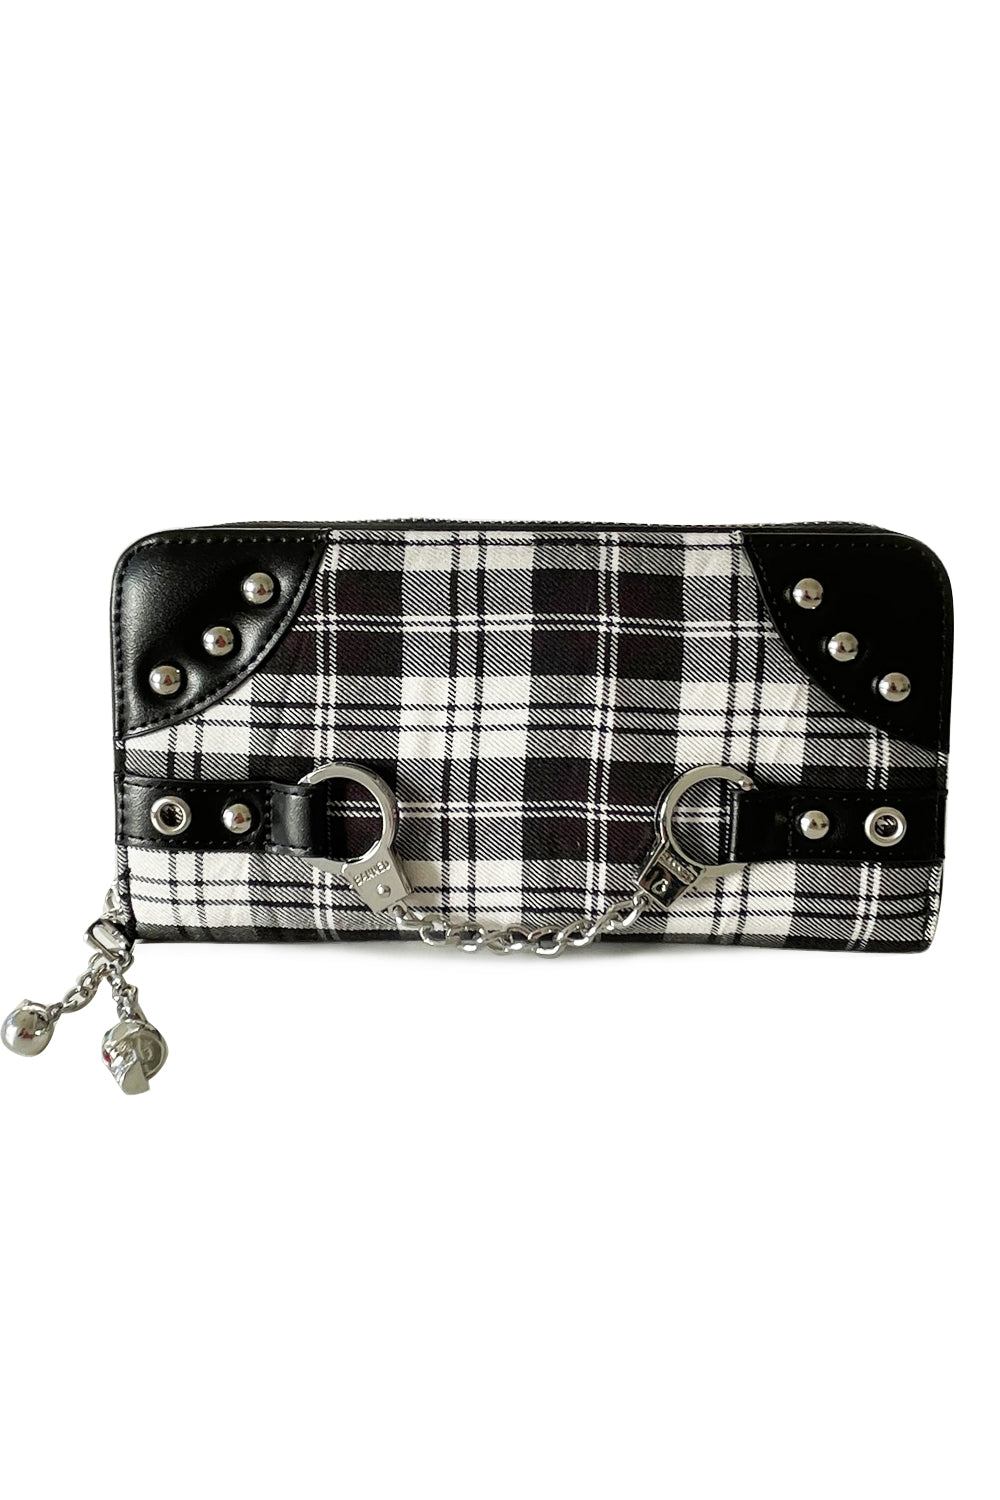 Banned Apparel Handcuff Wallet | Black/White